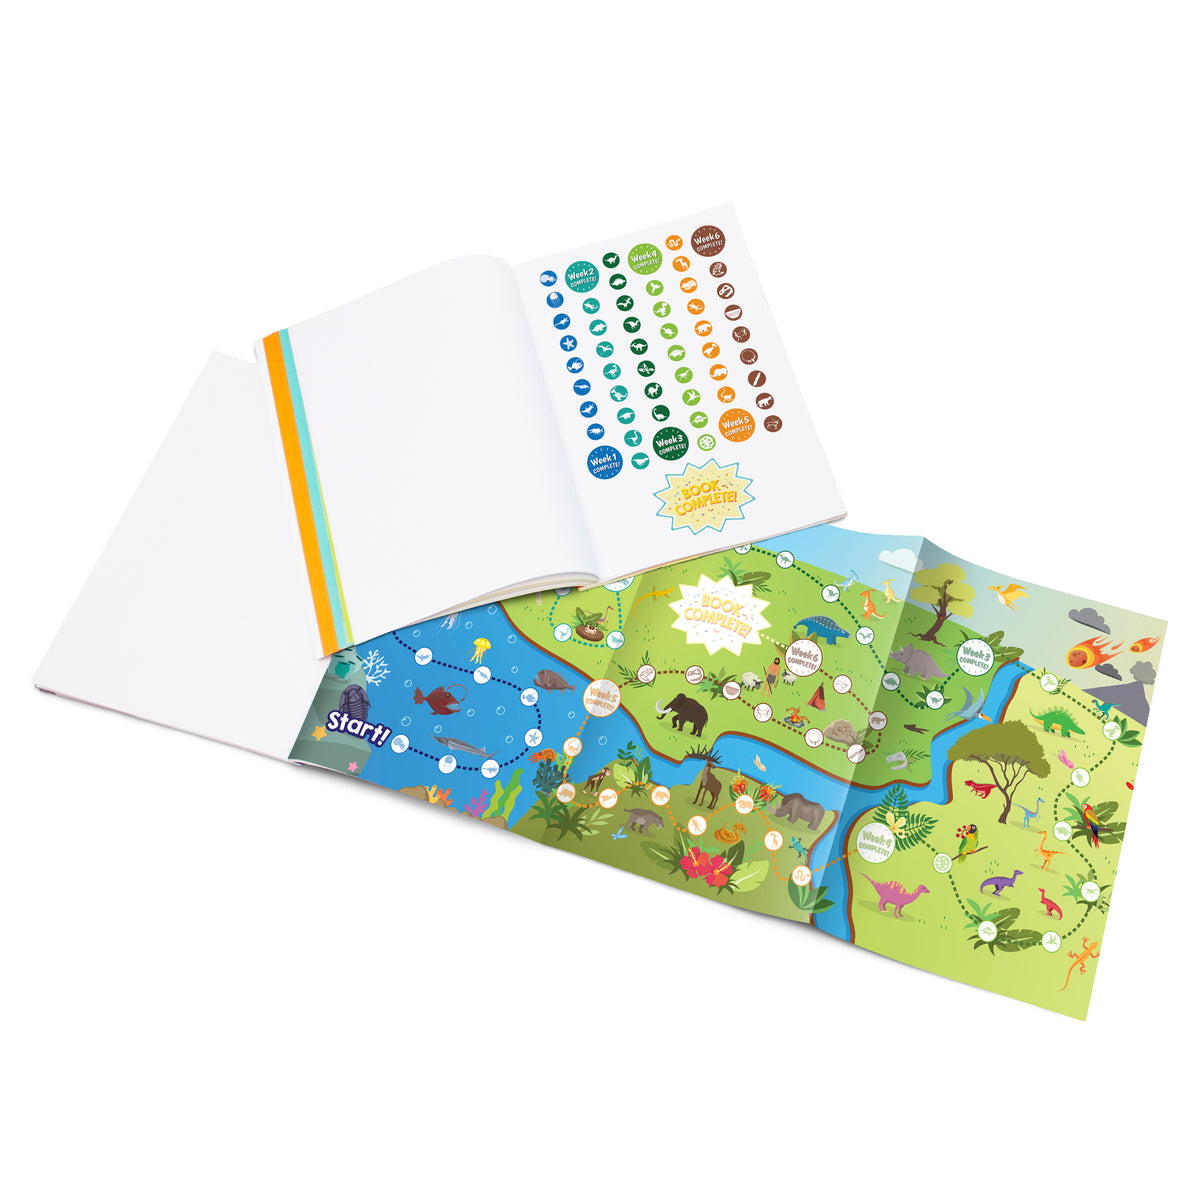 Junior Learning BB918 Phase 4 Blends Workbook - 12 Pack sticker and map